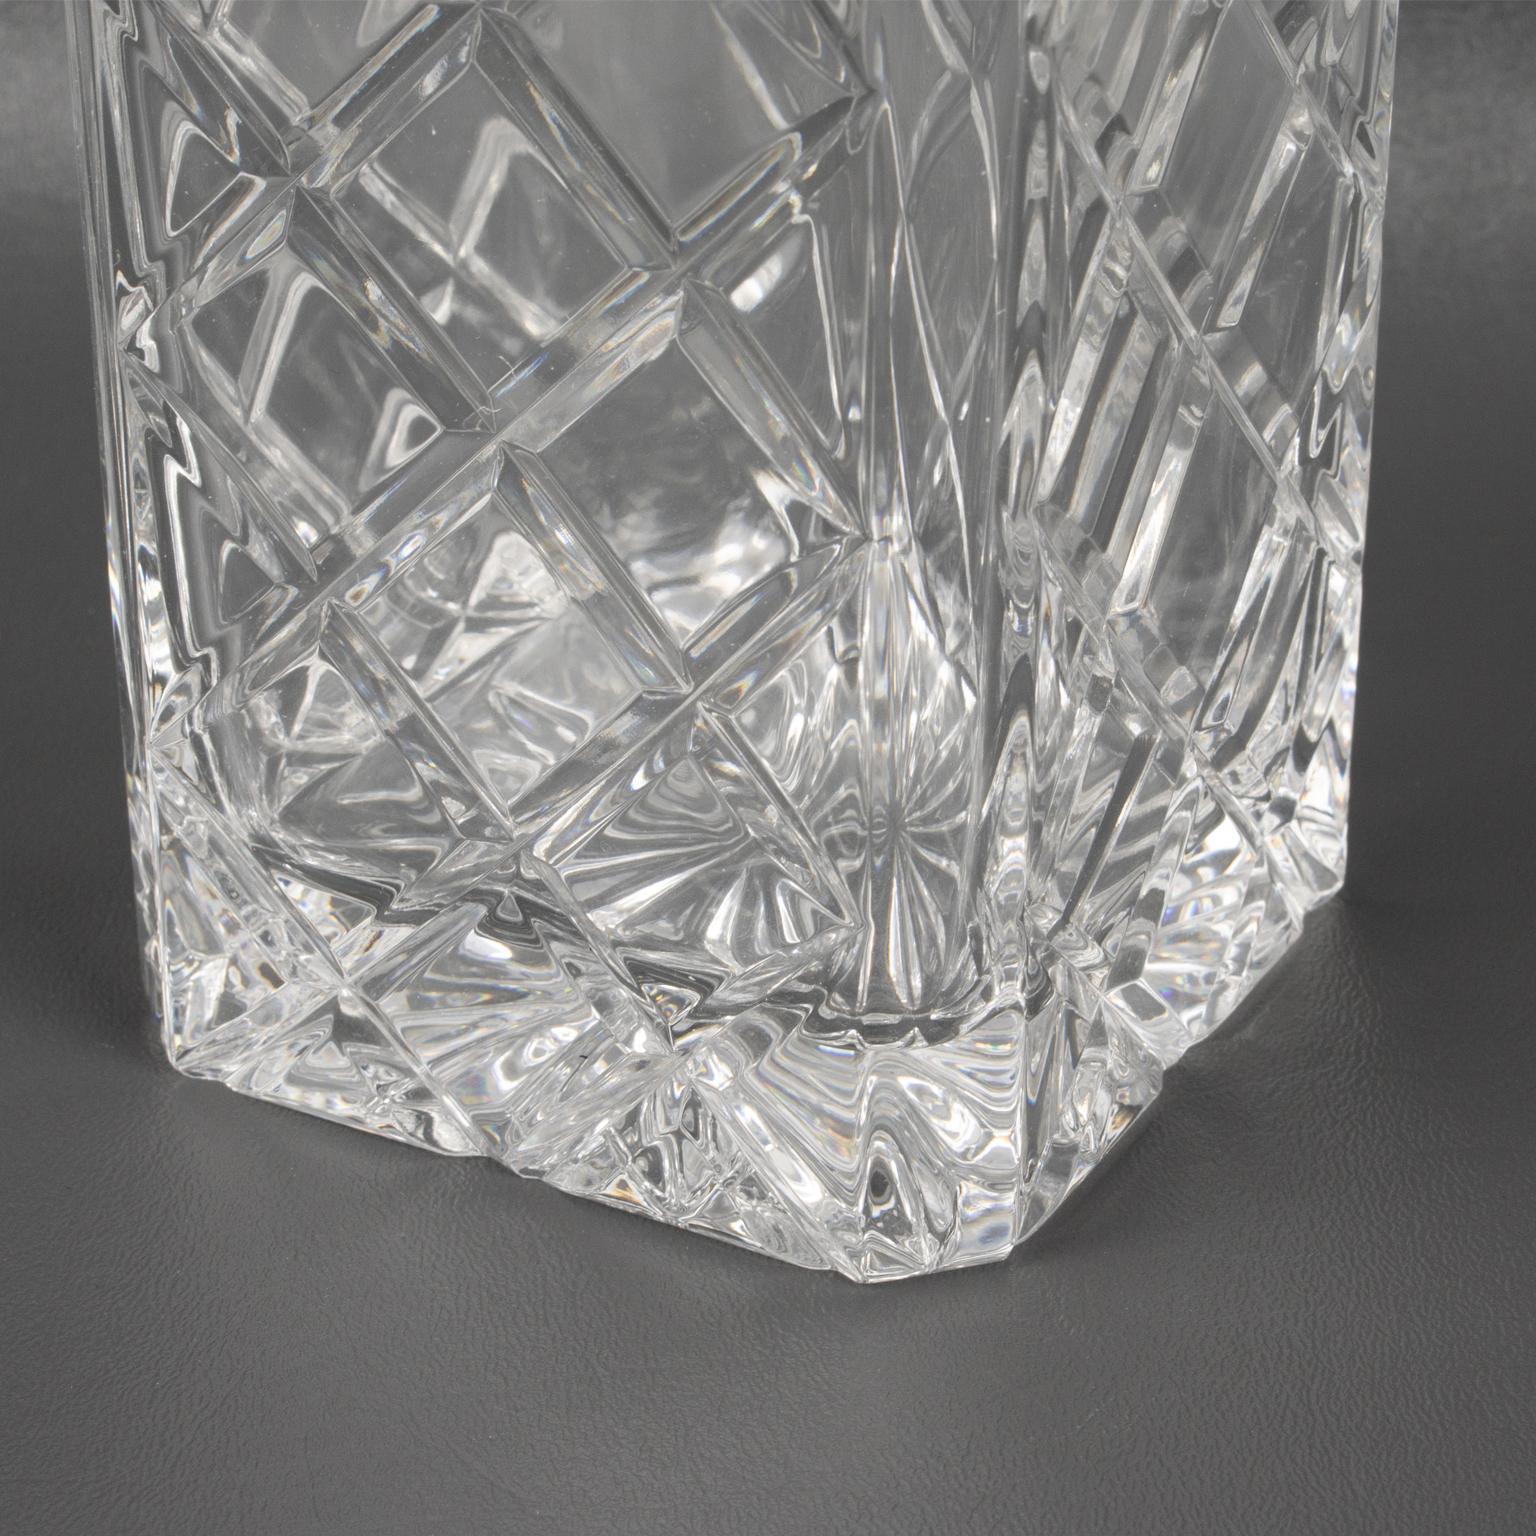 French Christian Dior Crystal Decanter and Glasses Set, 5 pieces in Original Box, 1980s